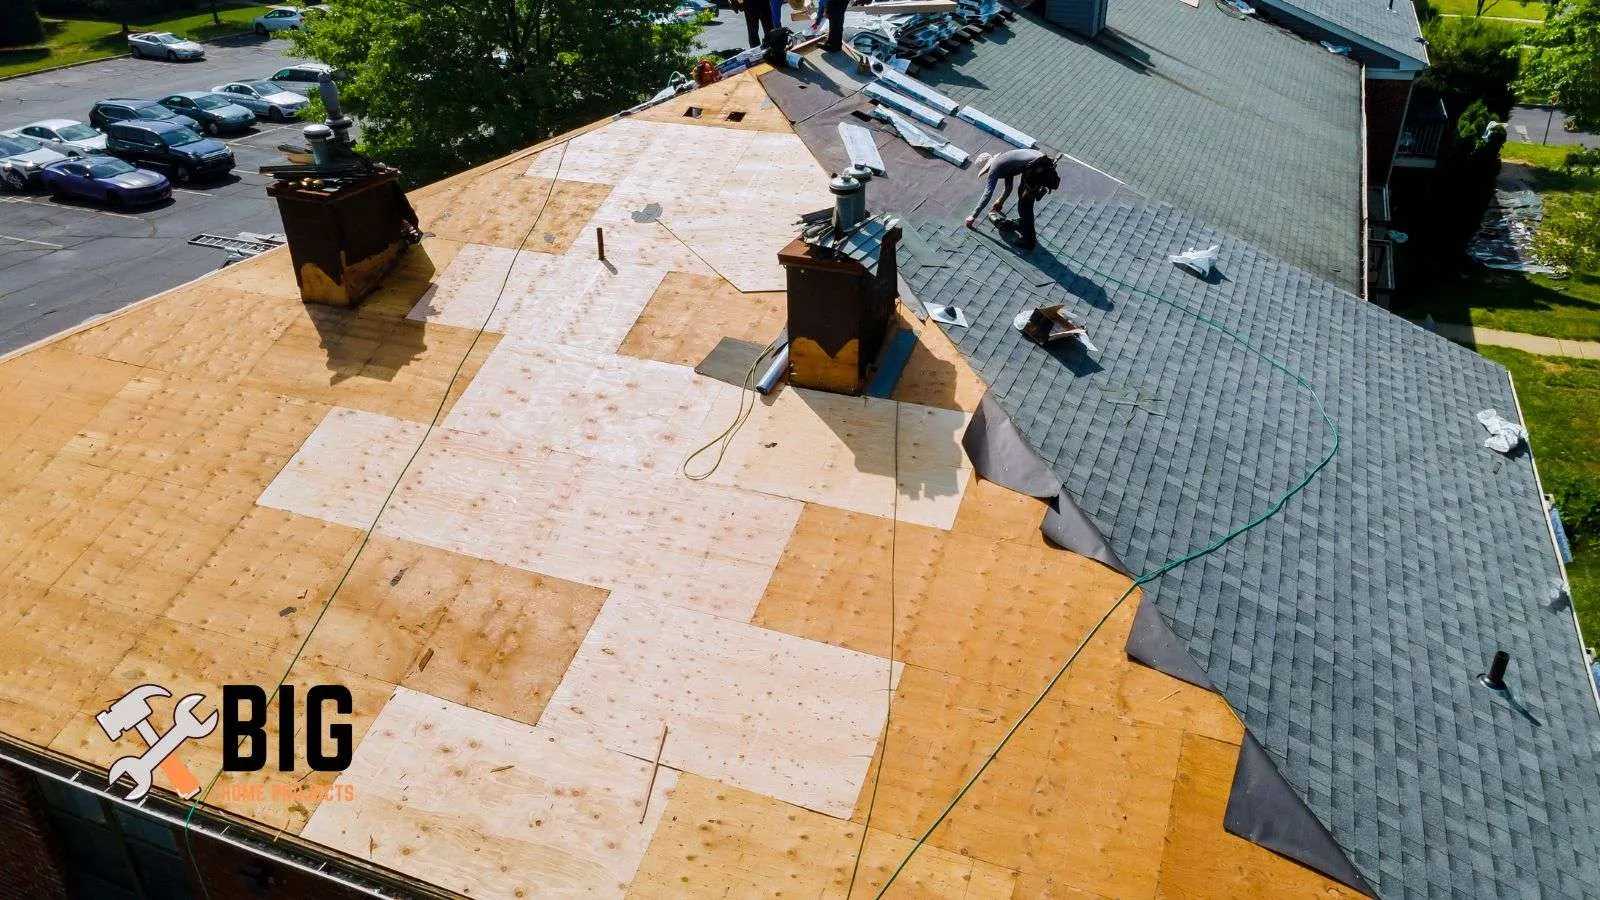 Roofing sheathing around a house - bighomeprojects.com